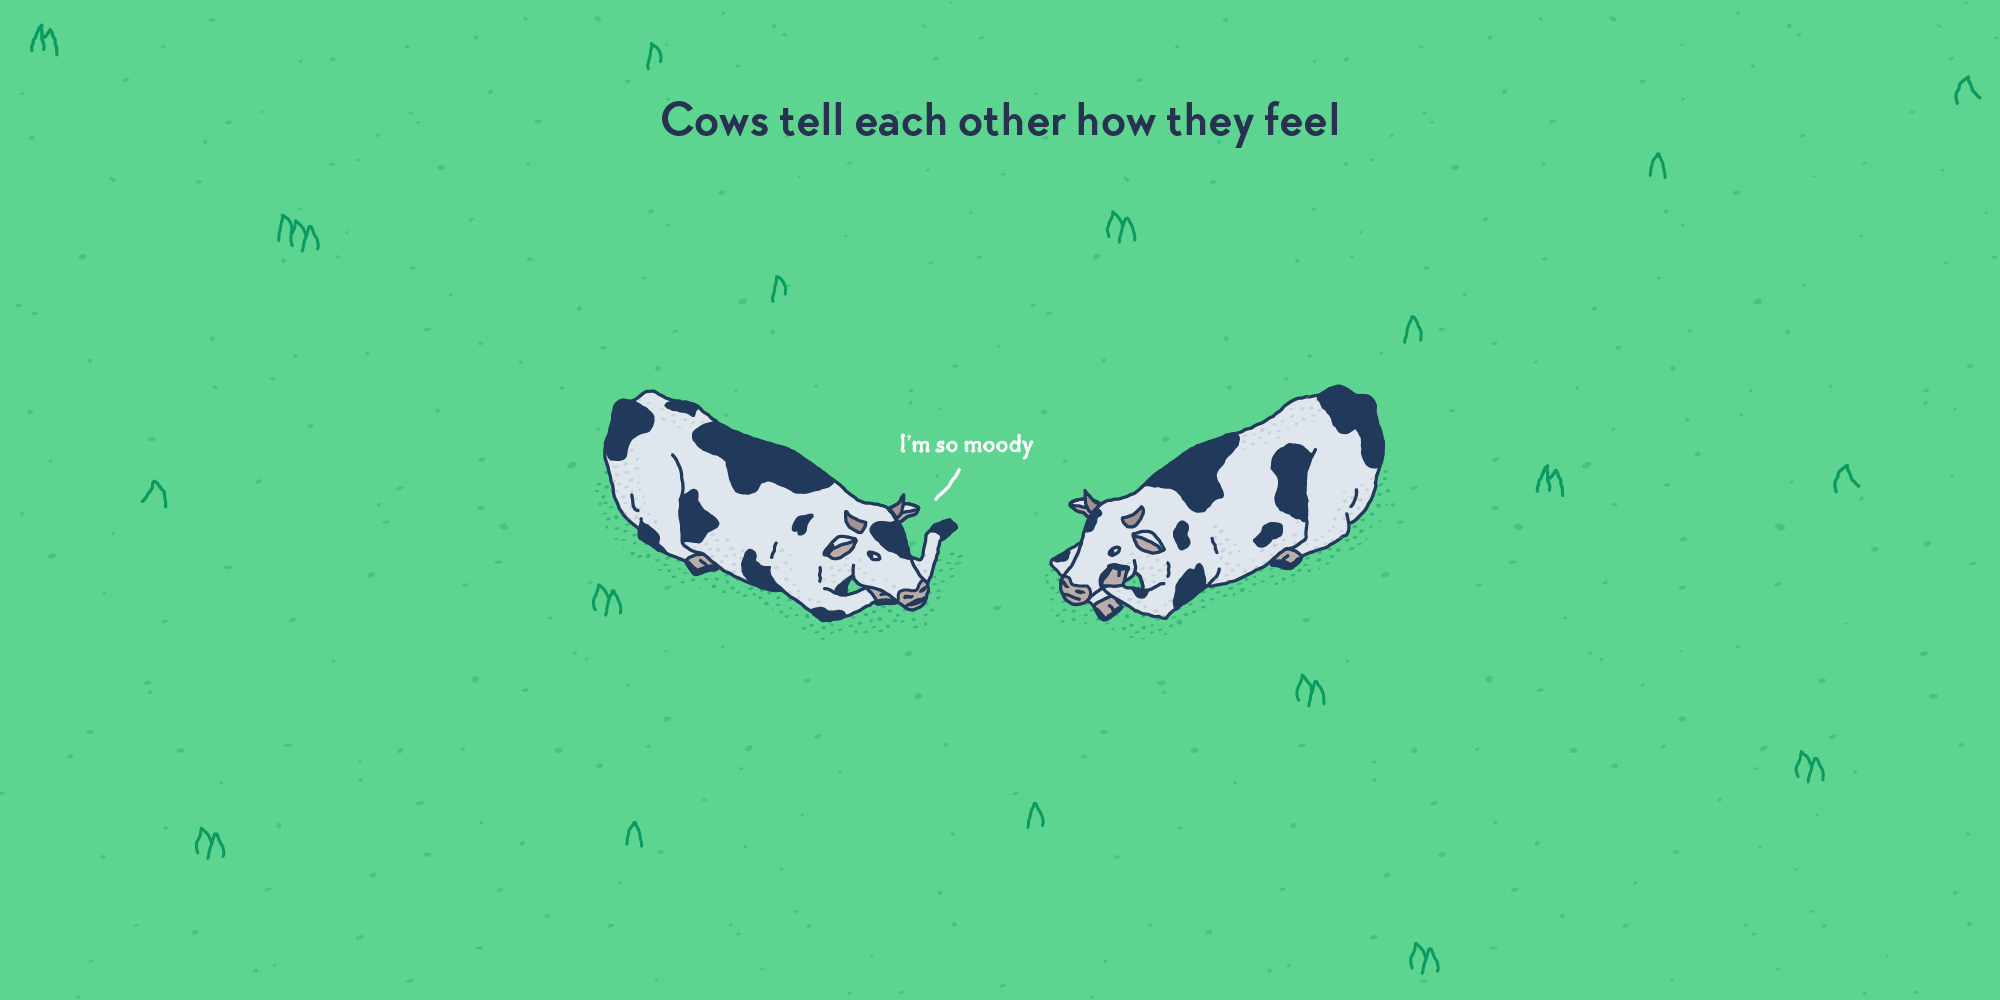 Two cows lying in the grass, one saying to the other: “I’m so moody”.